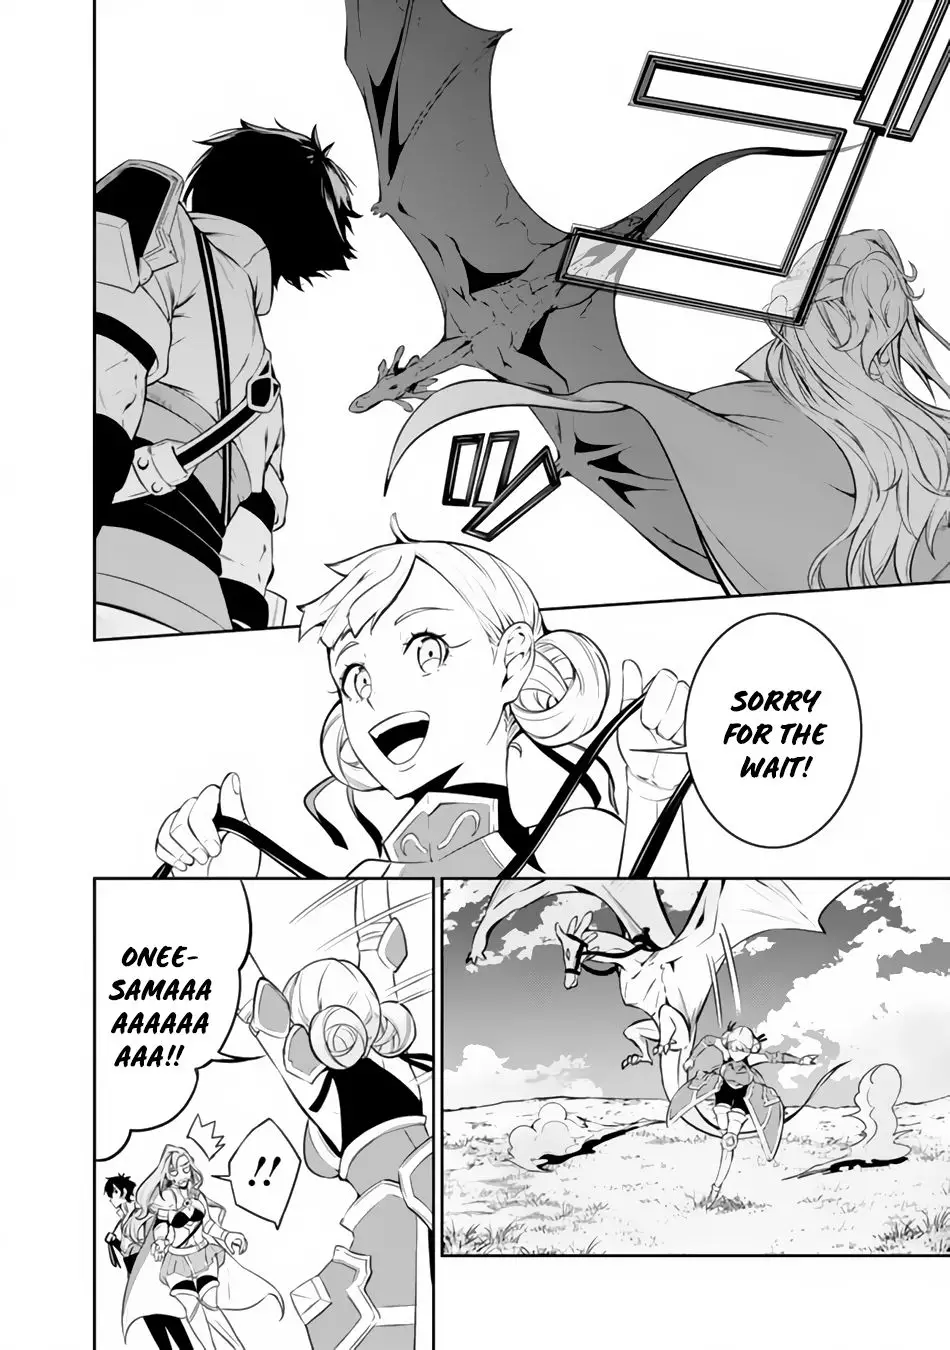 The Strongest Magical Swordsman Ever Reborn As An F-Rank Adventurer. - 71 page 9-805e83ab